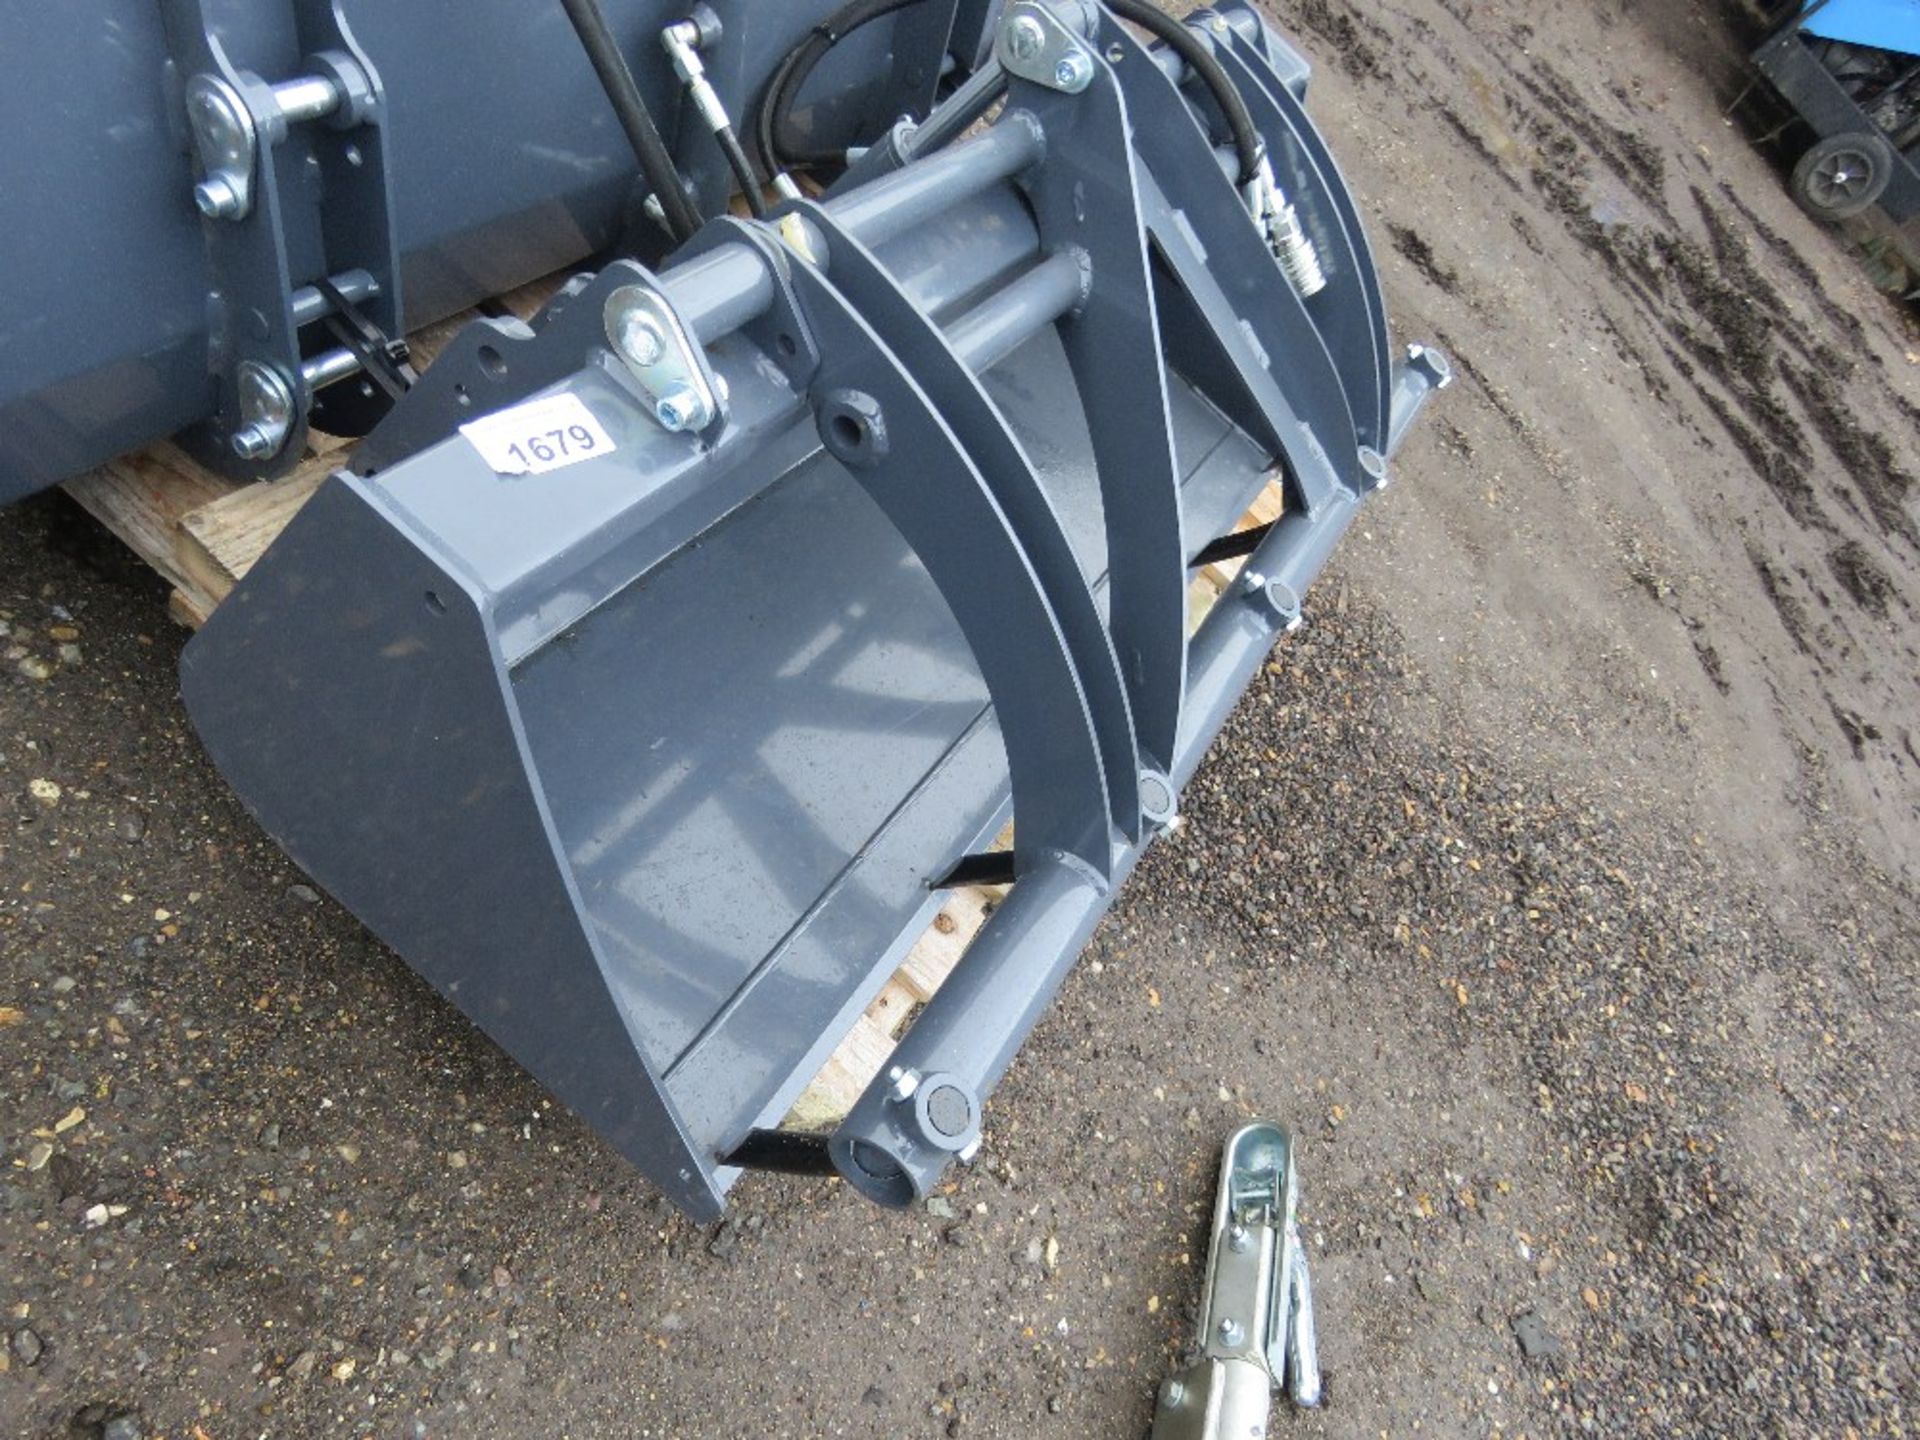 UNUSED MUCK GRAB BUCKET ATTACHMENT FOR SMALL SIZED LOADER/ SKIDSTEER OR COMPACT TRACTOR. 4FT WIDE AP - Image 4 of 4